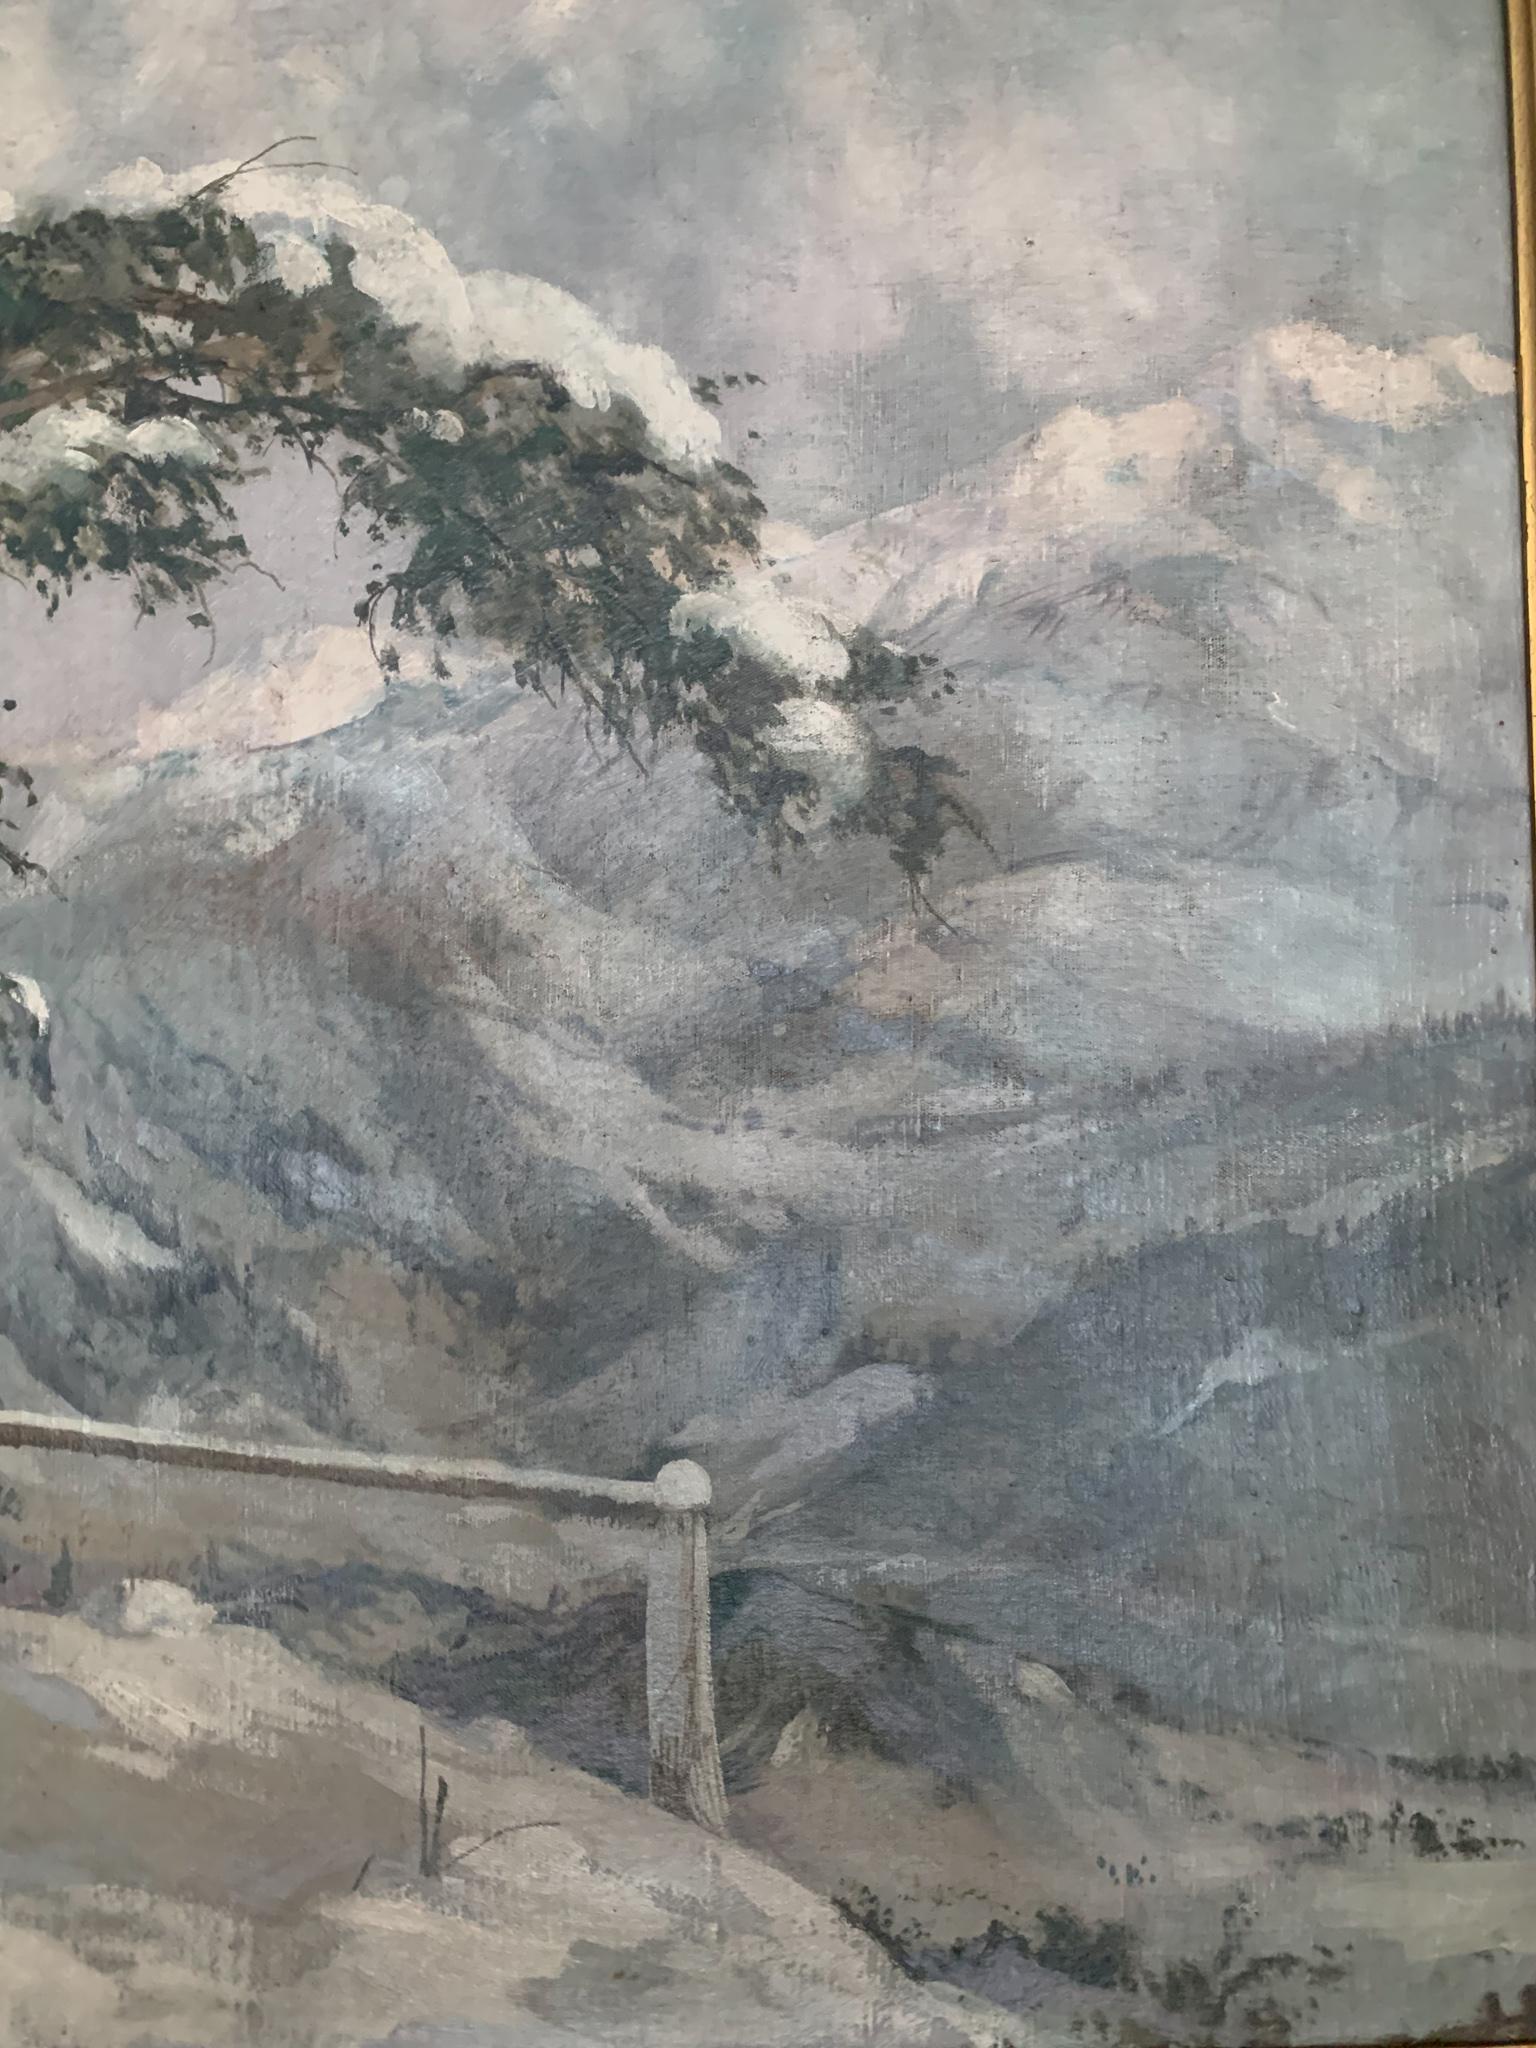 Italian Oil Painting on Canvas by Alberto Dressler 'Snowy Landscape' from 1944 For Sale 6